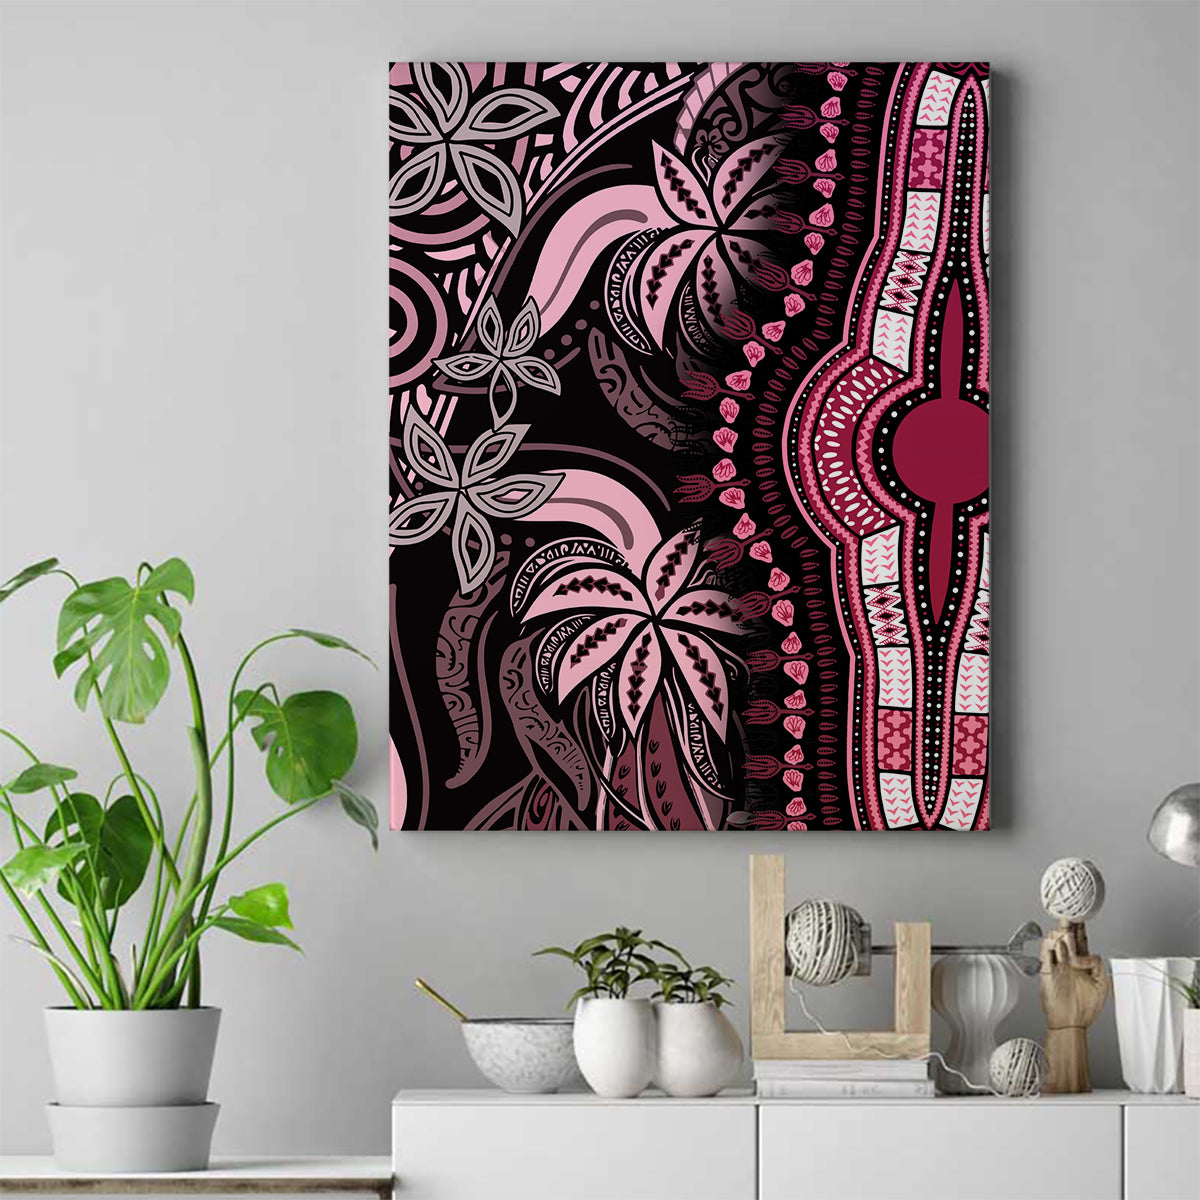 Polynesia Dashiki Canvas Wall Art Polynesia and Africa Traditional Special Together Pink LT9 Pink - Polynesian Pride